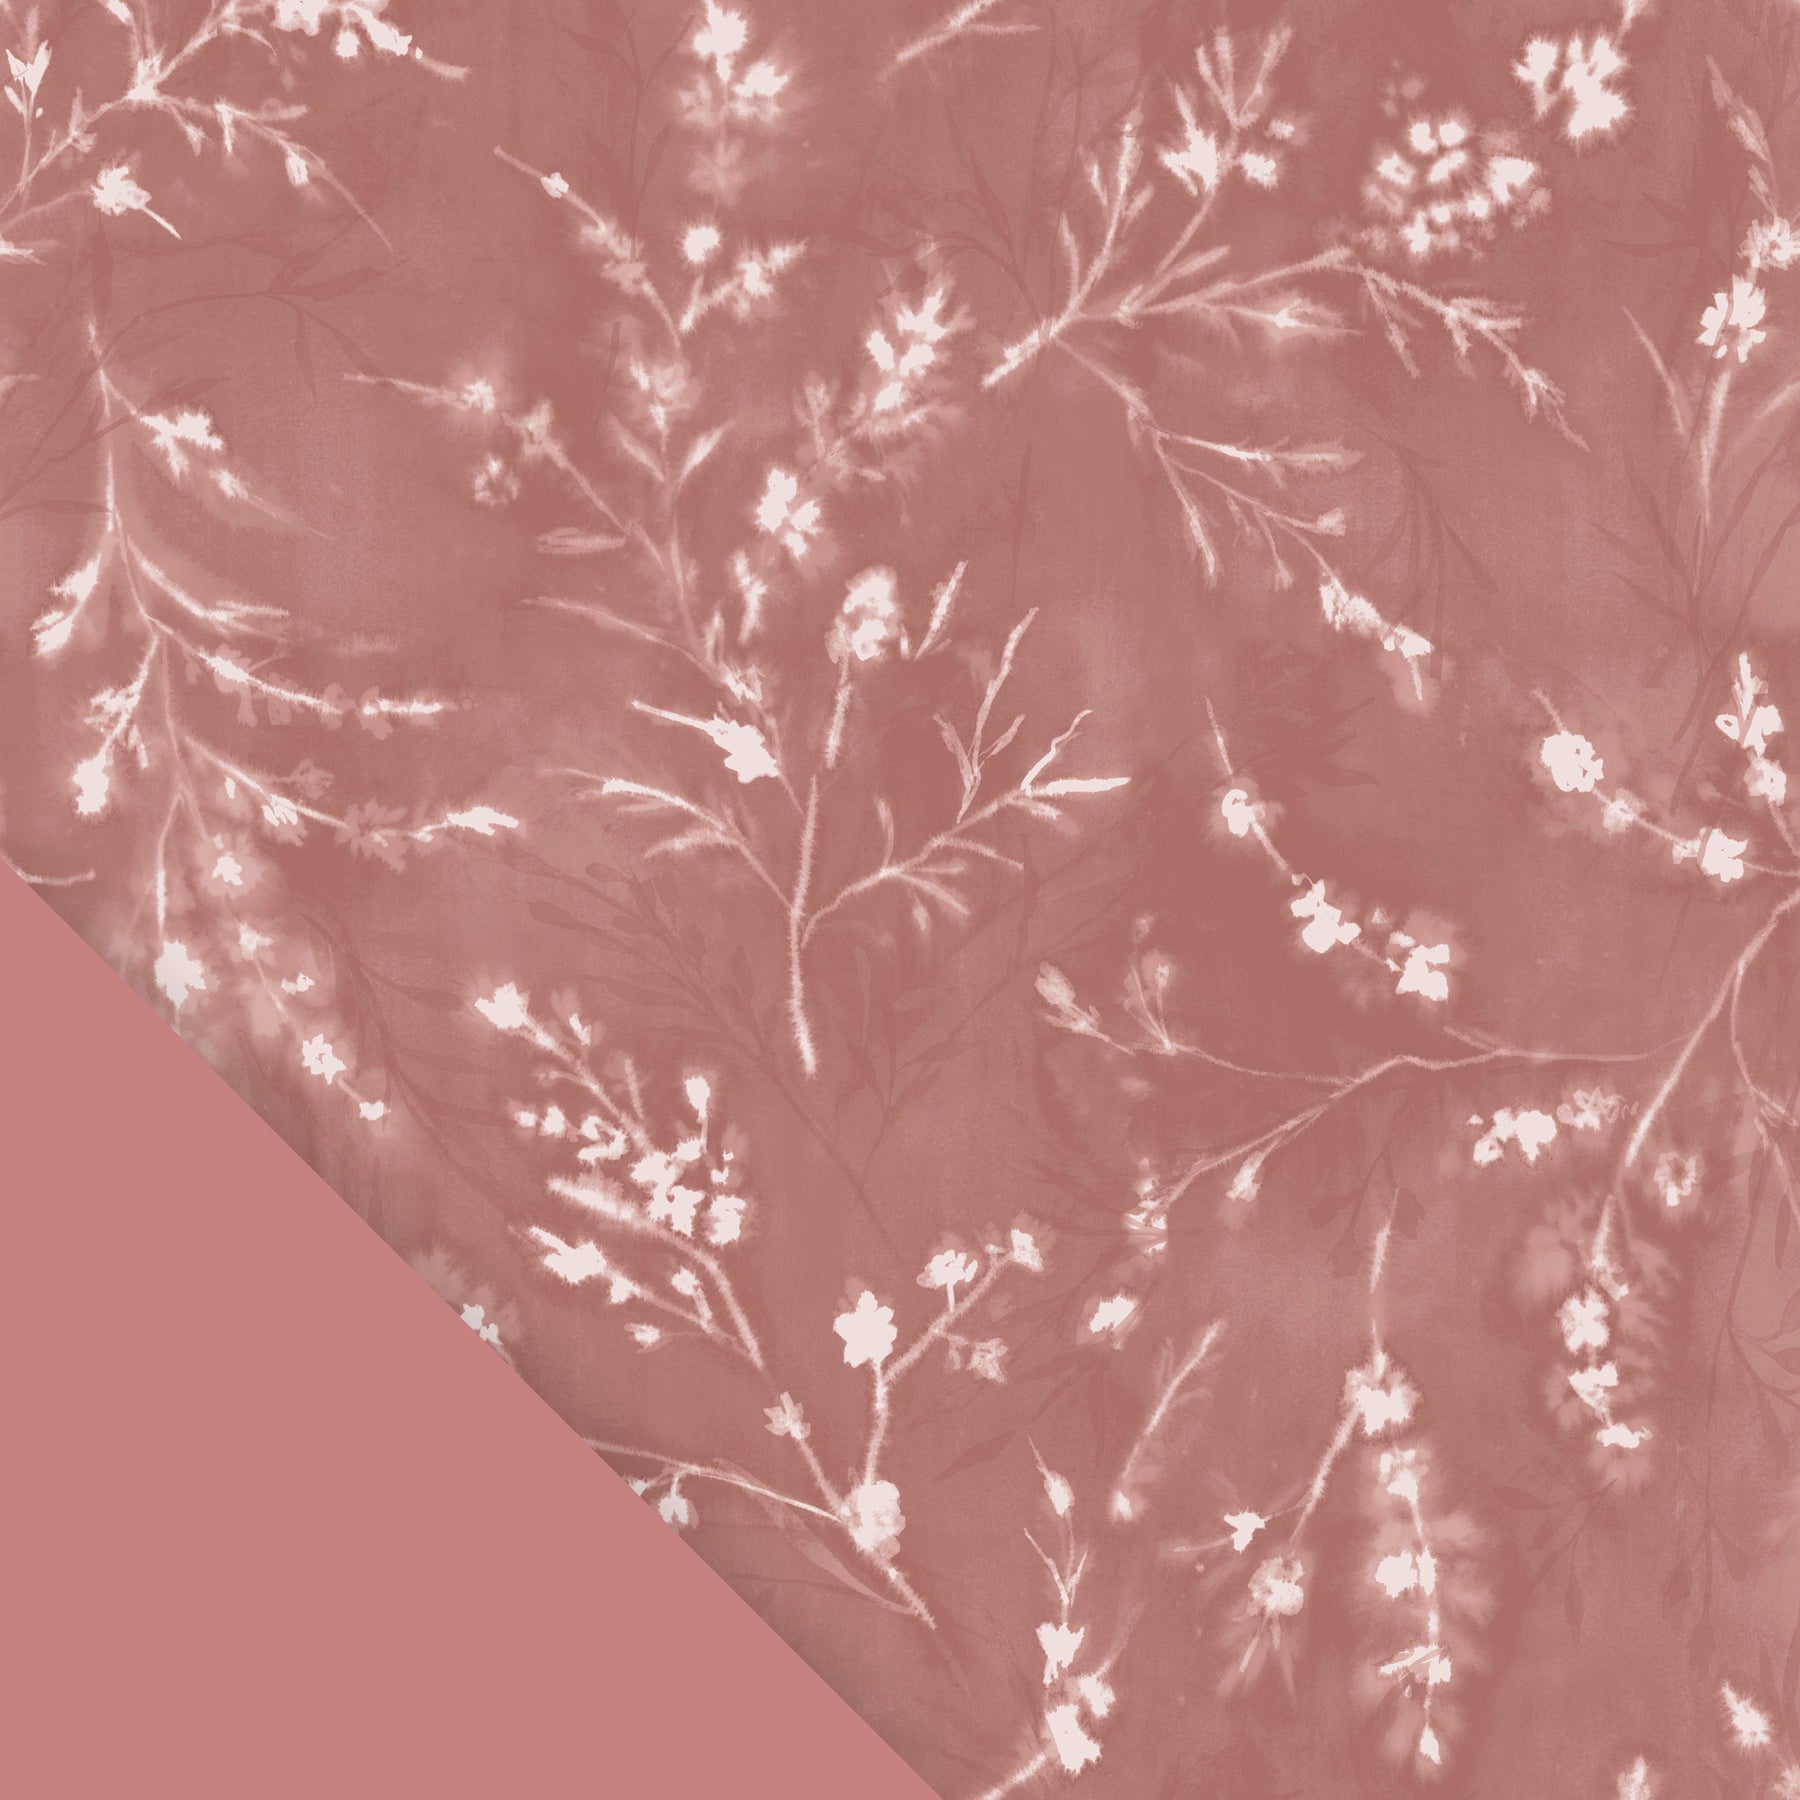 Close-up image of the Floral Ash Rose pattern with a small section of the plain Ash Rose color in the bottom left corner